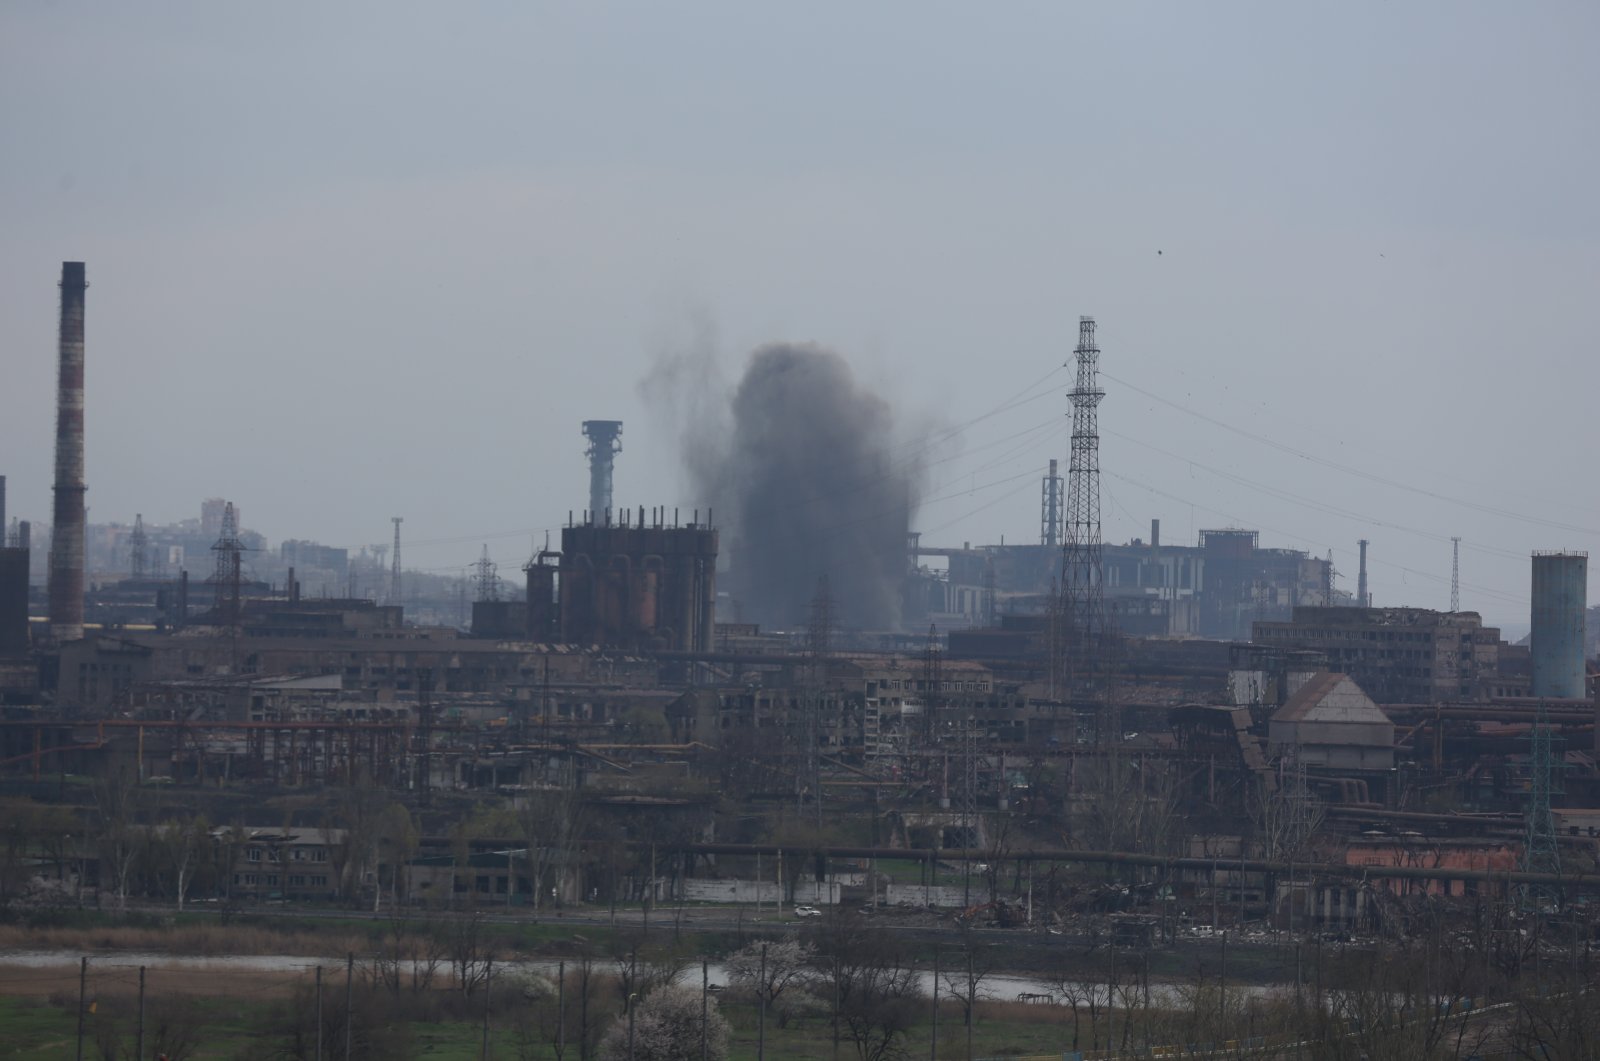 Smoke rises from the Azovstal plant as the Russian army has taken control of Ukraine&#039;s besieged port city of Mariupol except for the Azovstal plant, April 22, 2022. (AA Photo)